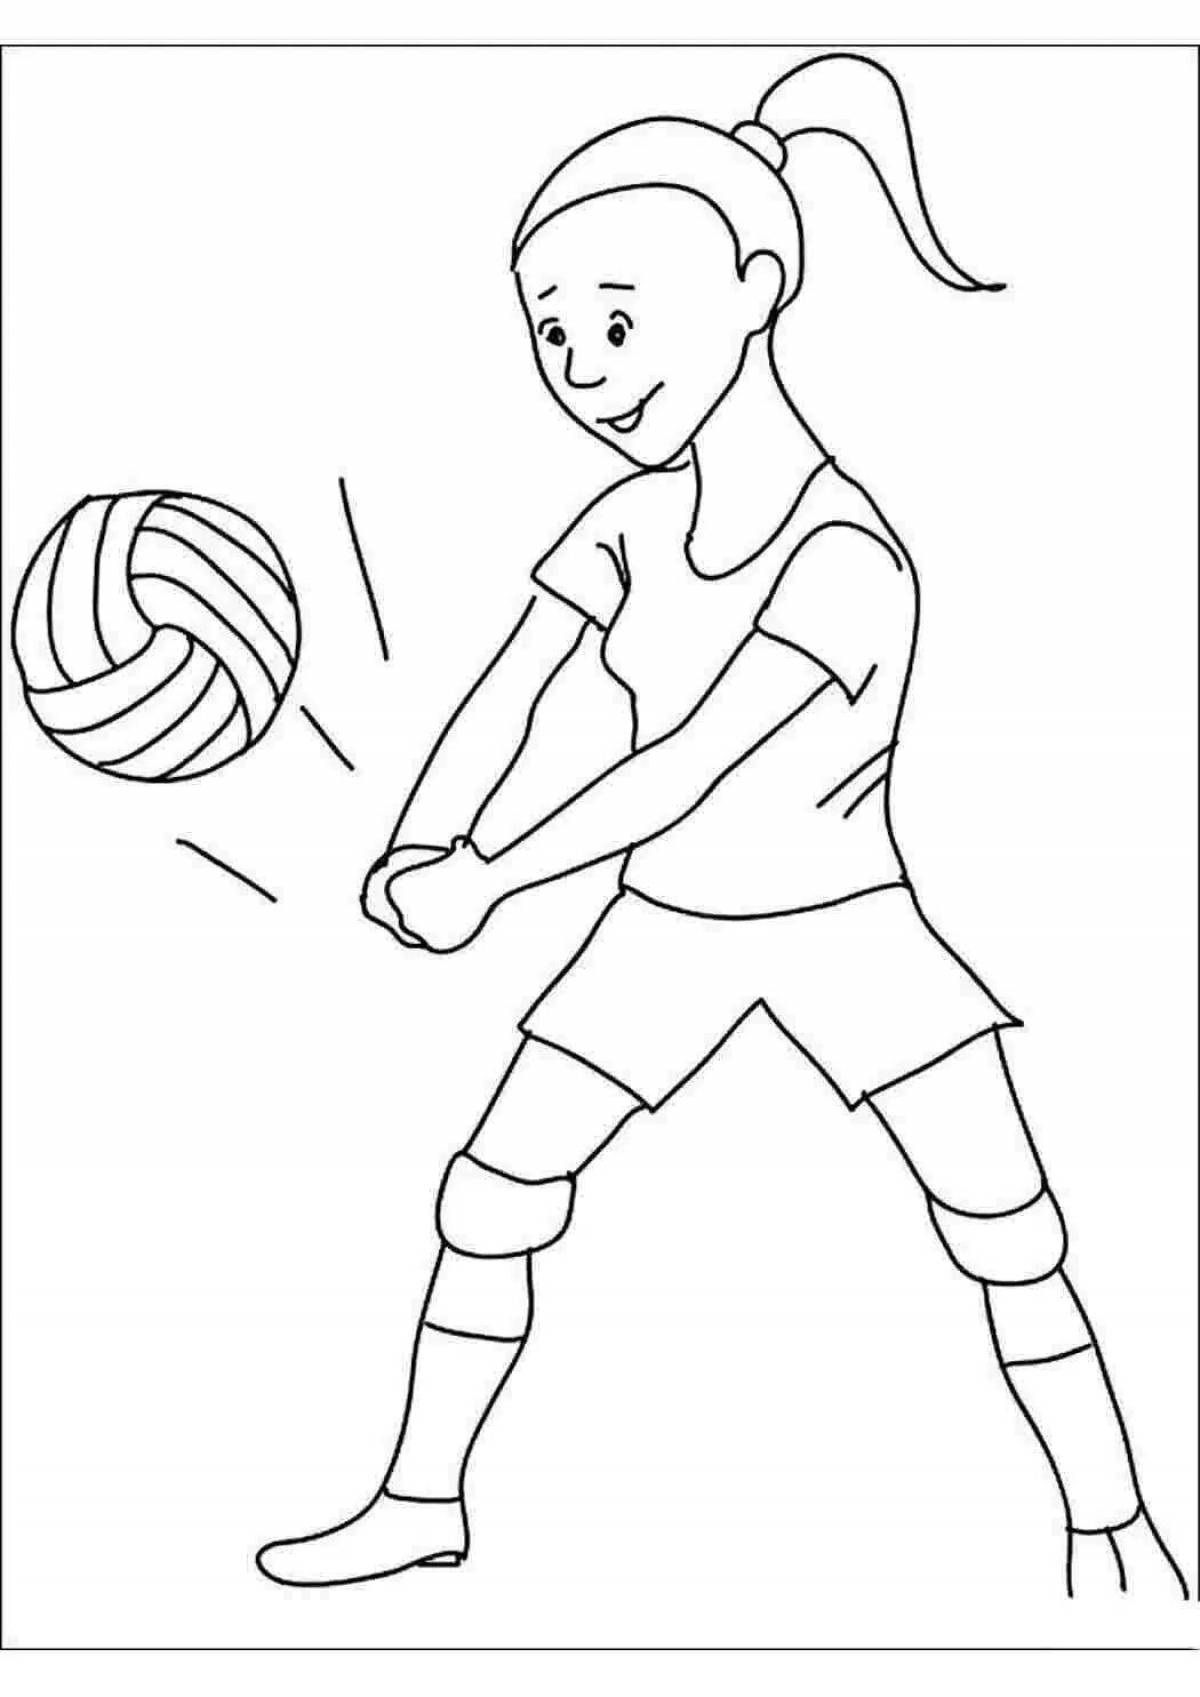 Playful volleyball coloring book for kids